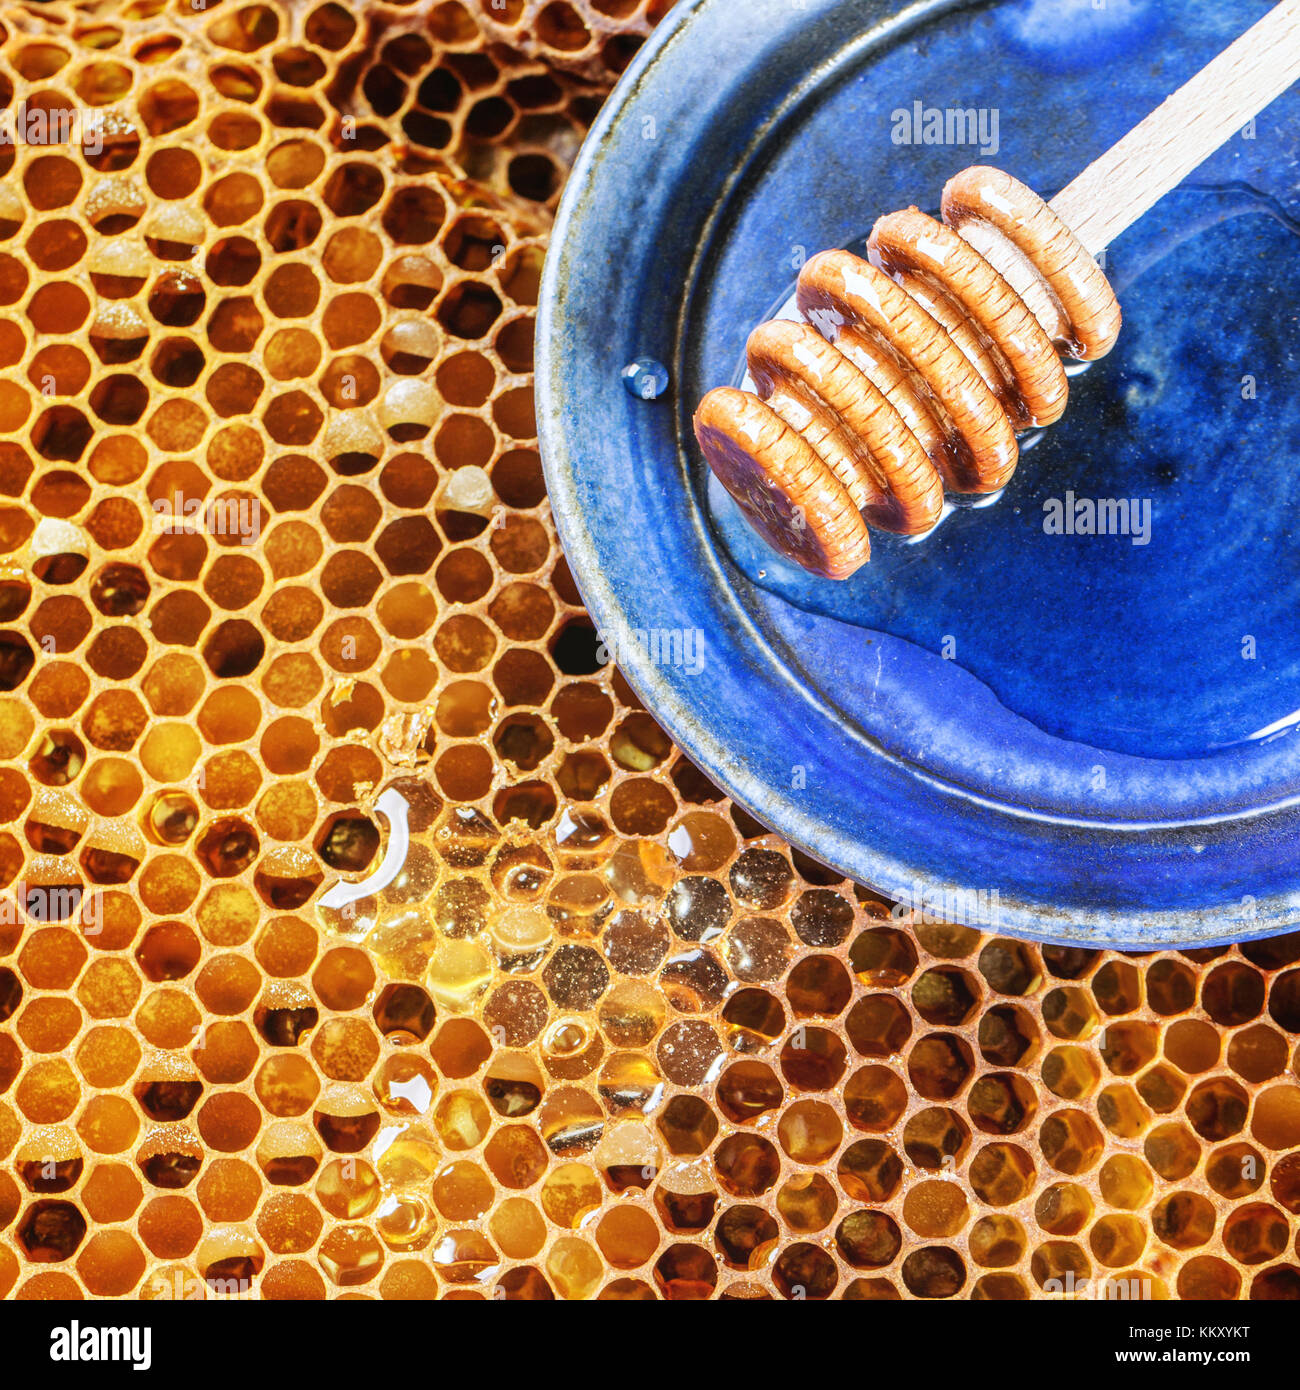 Honeycombs with honey, bee and wooden honey dipper over blue ceramic plate. Square image Stock Photo